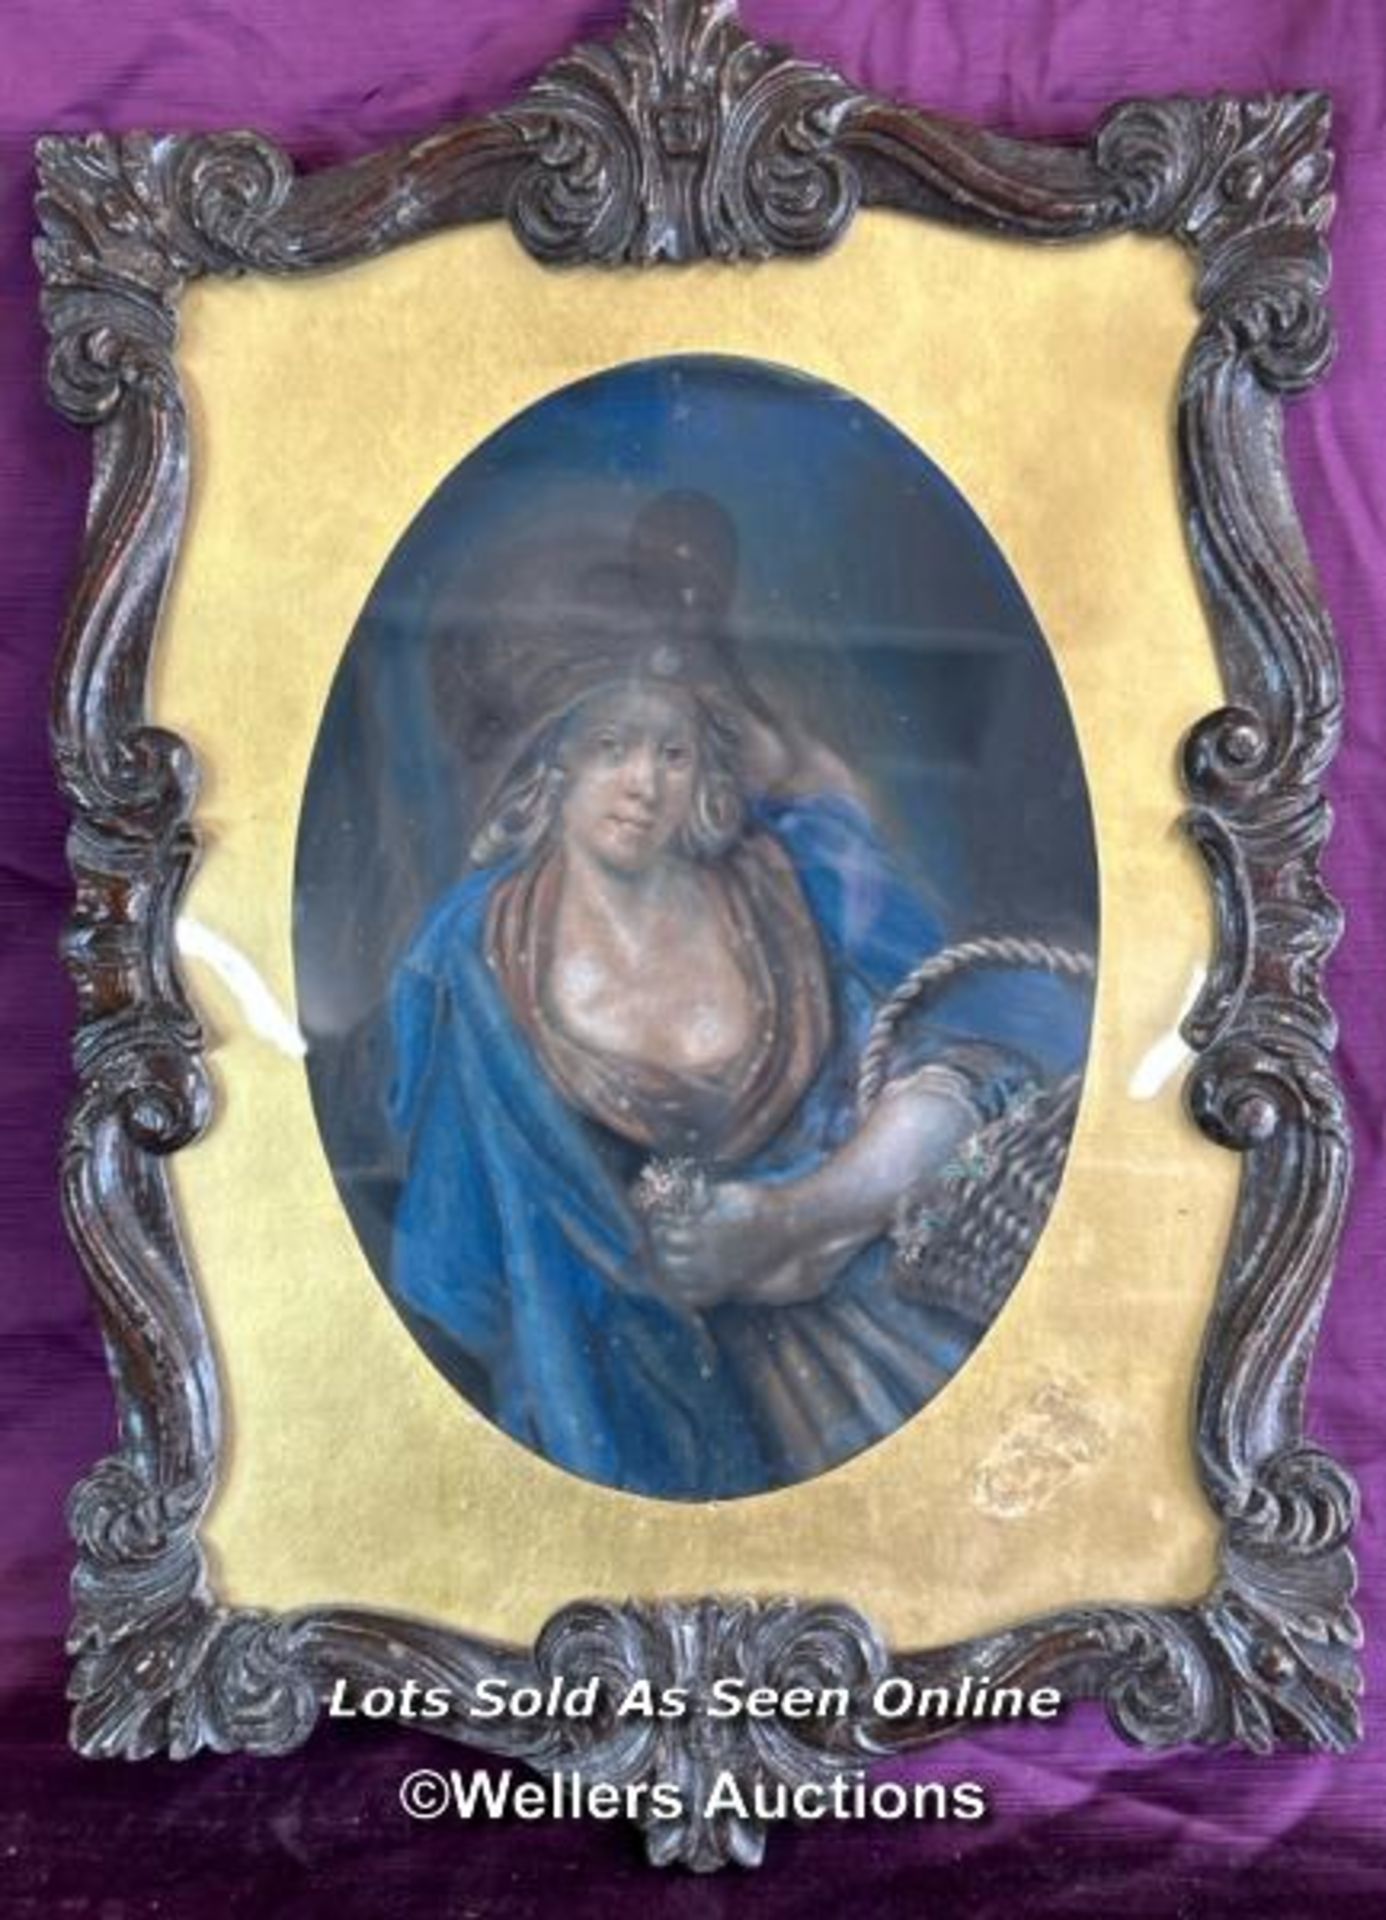 PASTEL ON PAPER PORTRAIT OF A LADY WITH A BASKET AND FLOWERS, IN A DECORATIVE CARVED WOODEN FRAME.